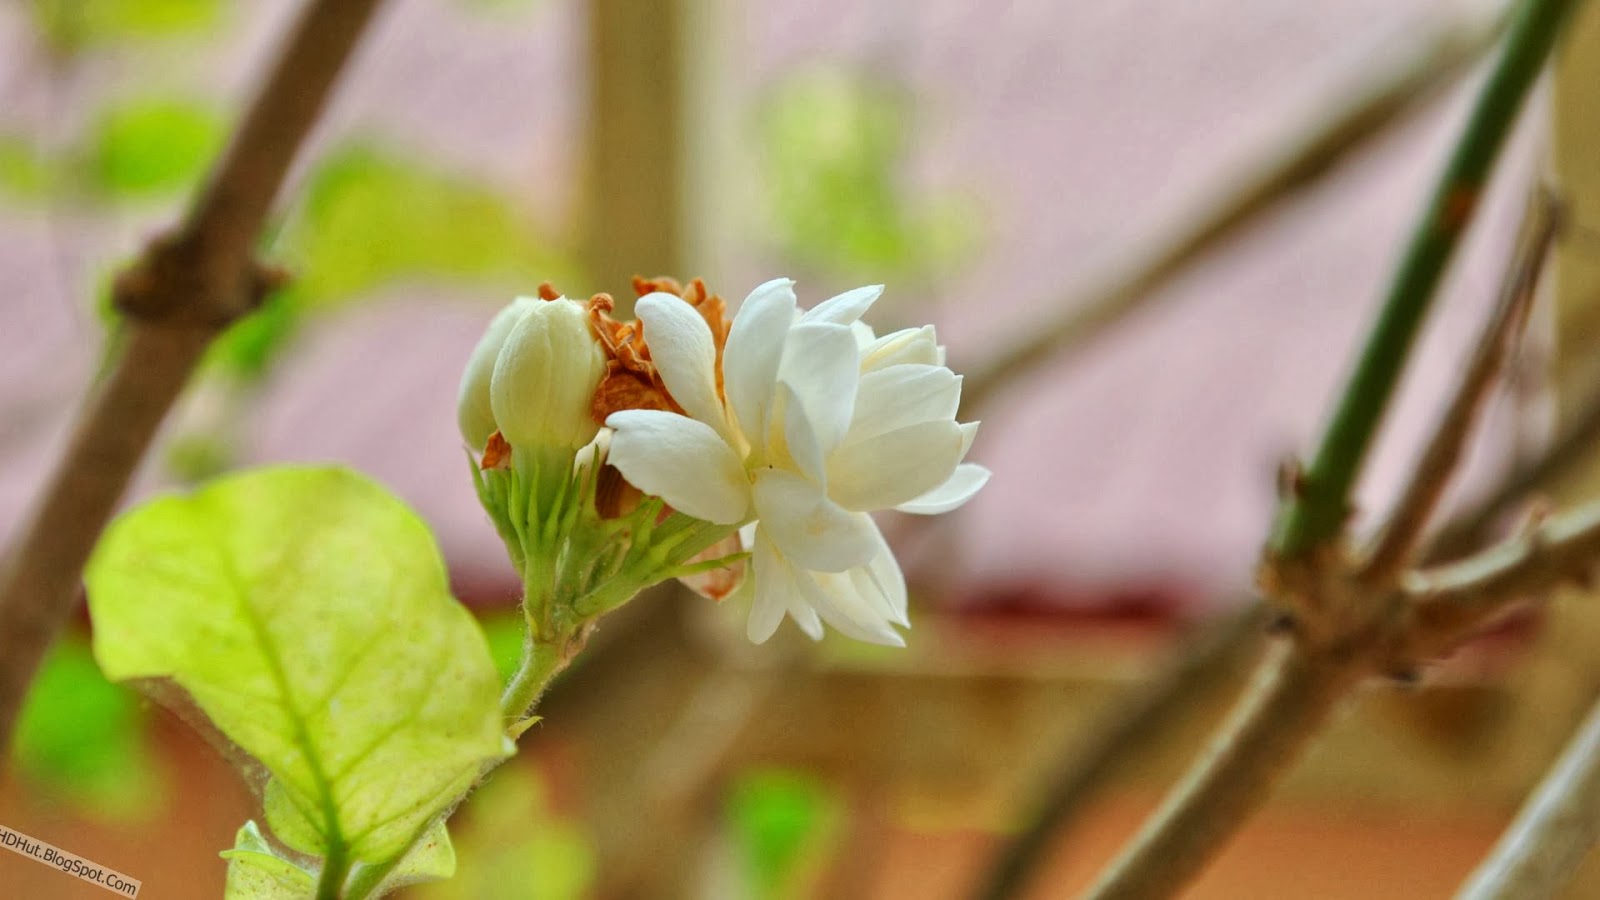  Jasmine  Flower  Wallpapers  In HD  Wallpapers  And Pictures